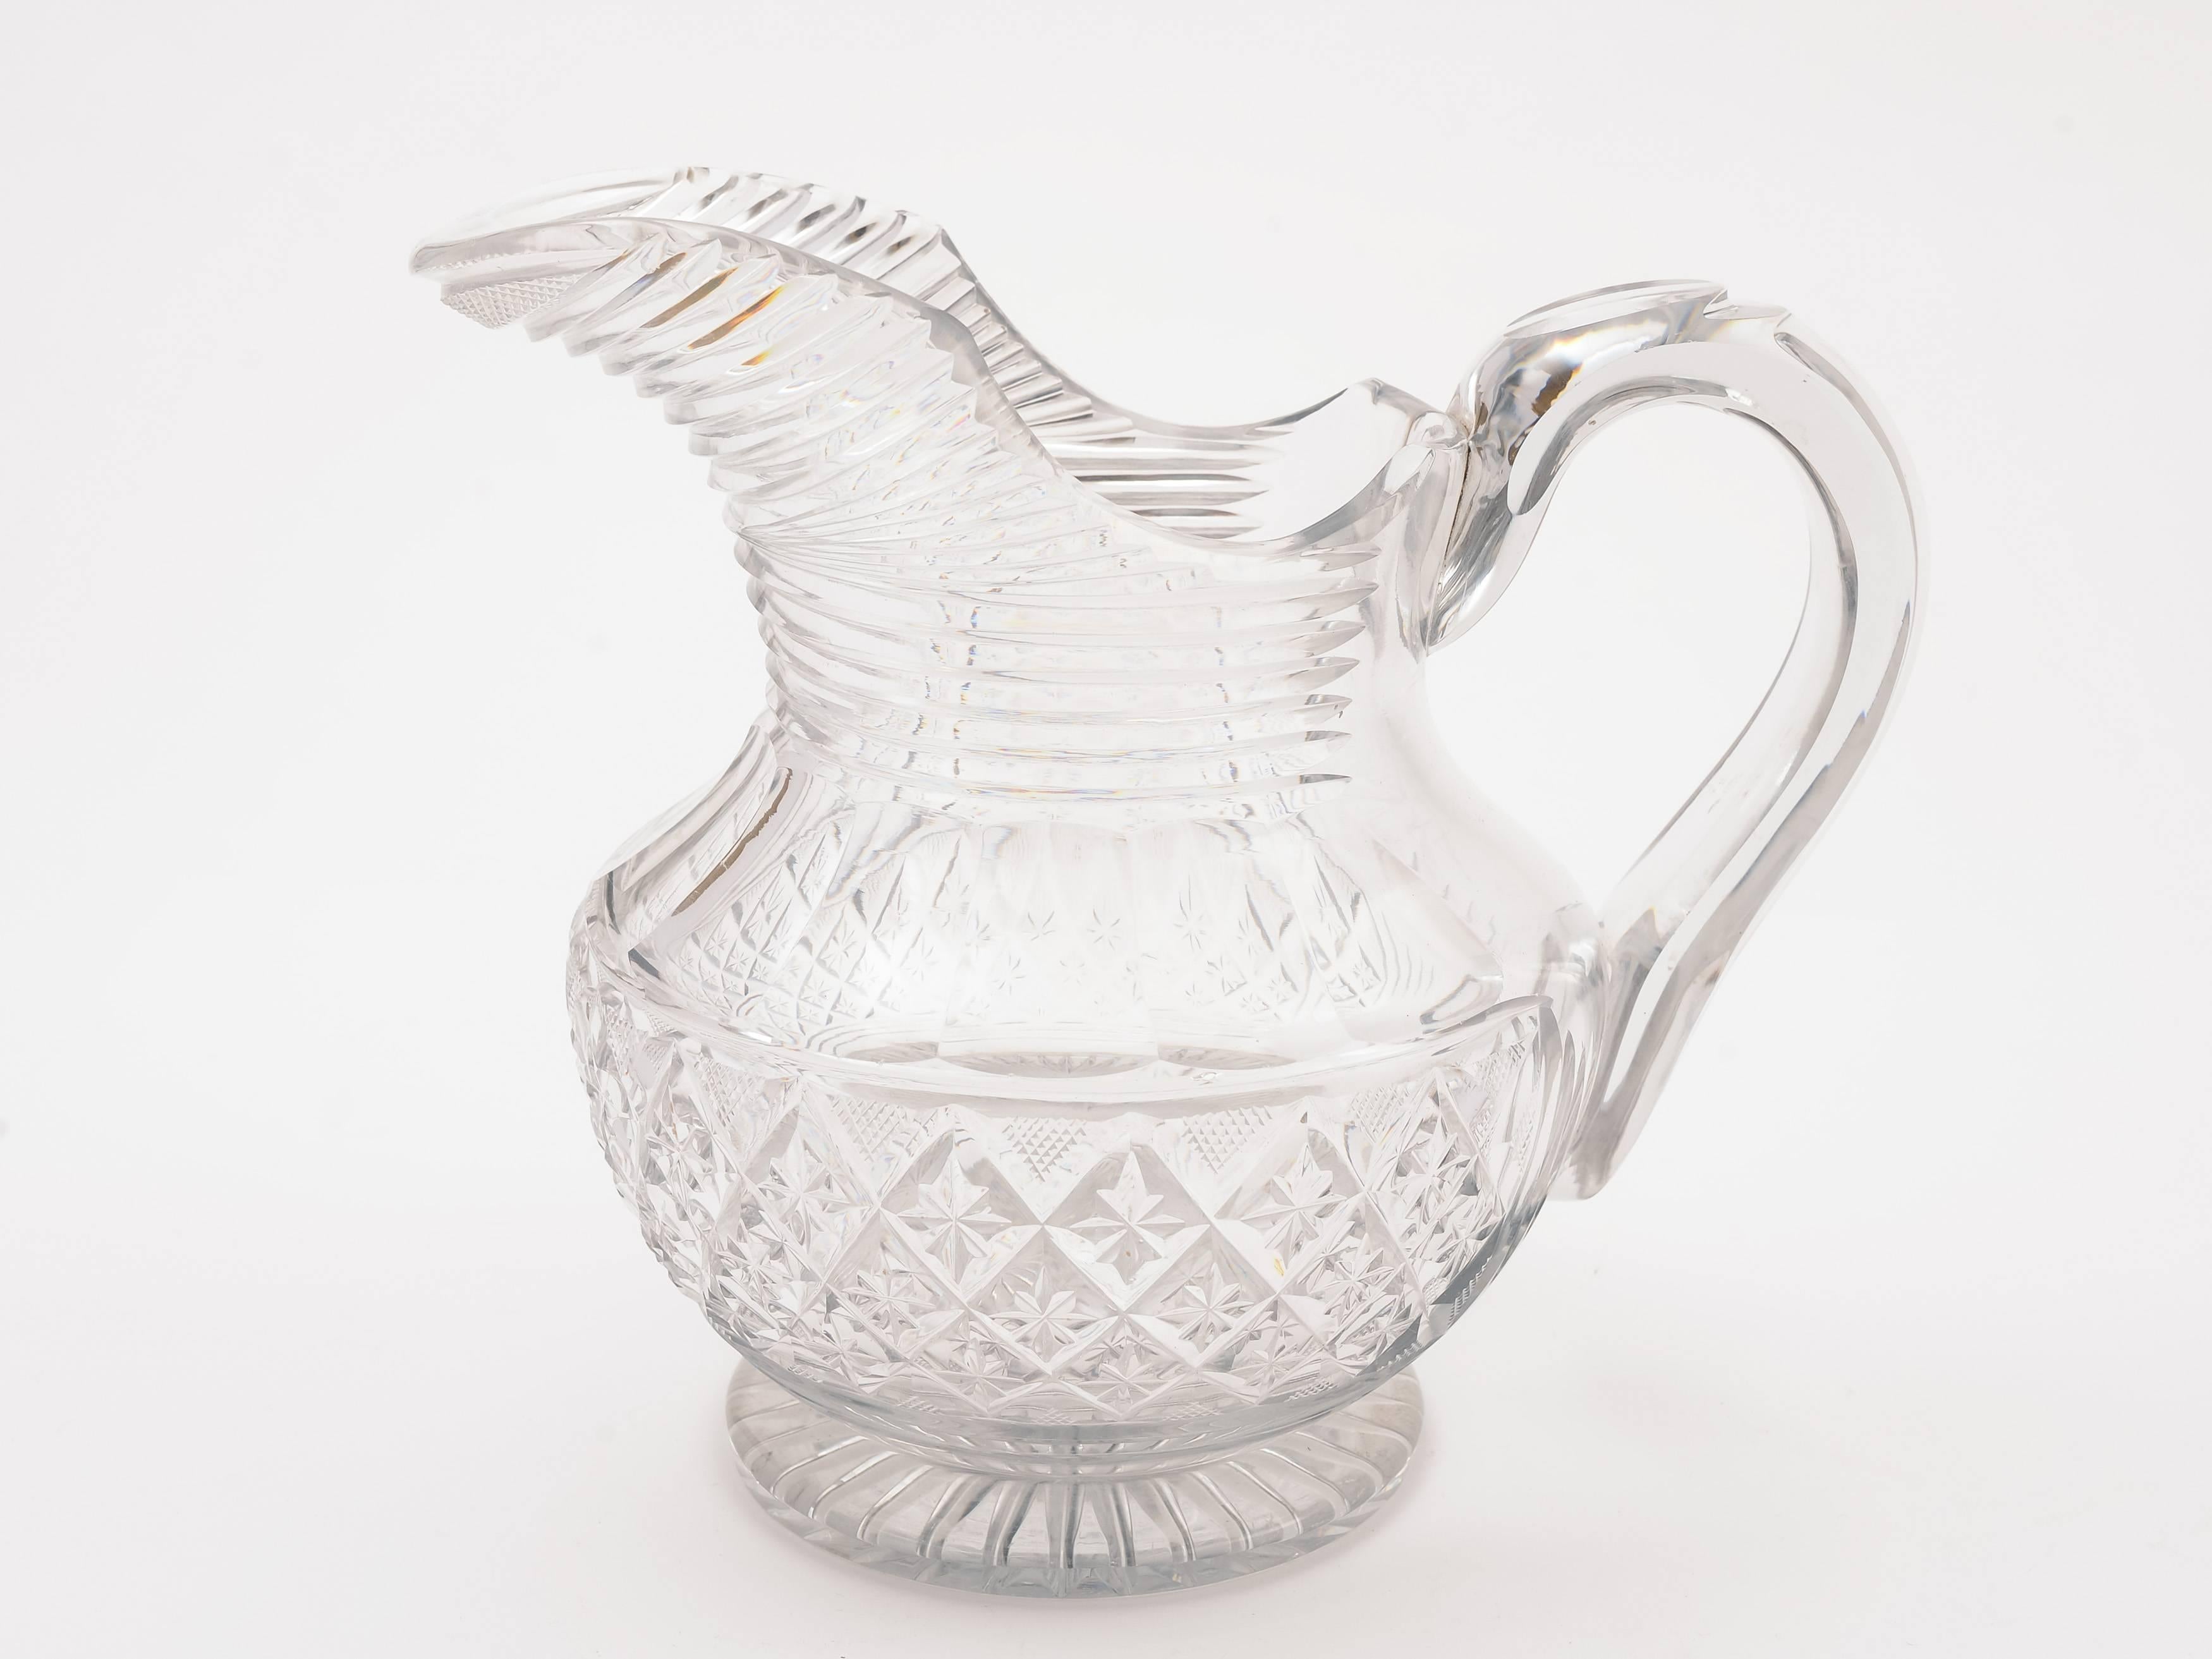 A nice English Georgian cut-glass water jug/pitcher with strap handle and star cut base, circa 1810.

Measurements:
Height: 7